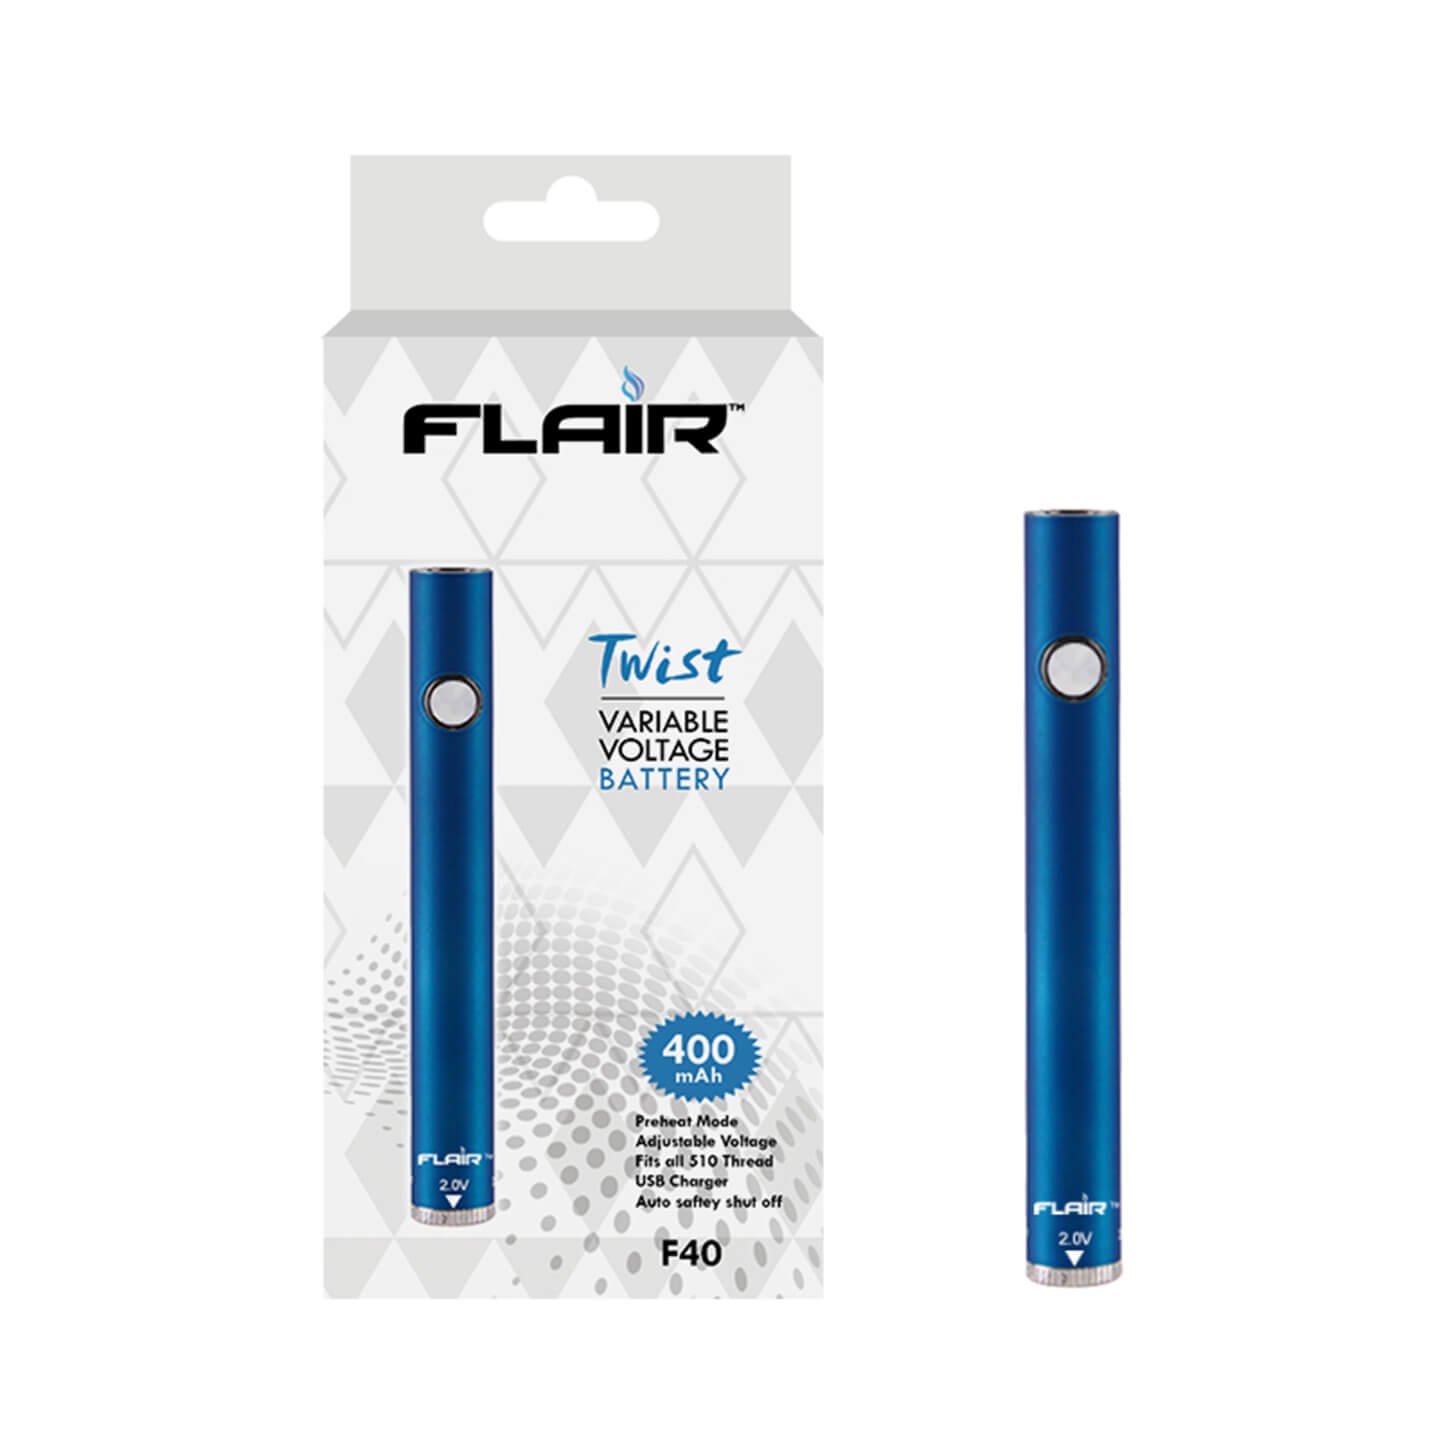 Flair Twist variable voltage battery 400mah(Blue) F40